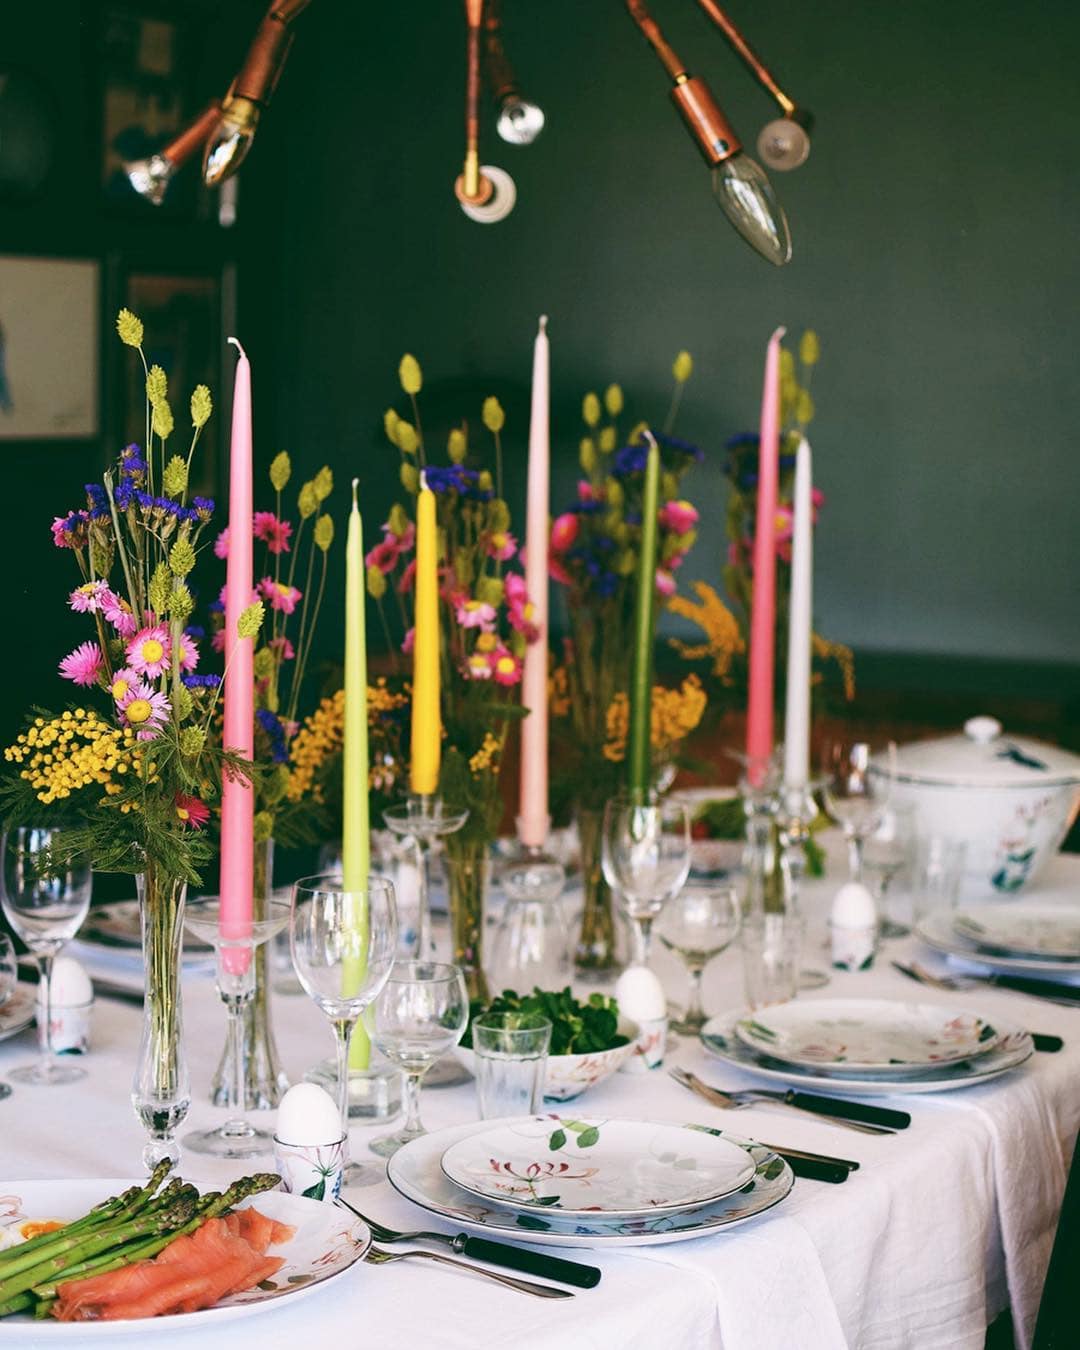 Colorful candles featured in centerpiece idea for holidays